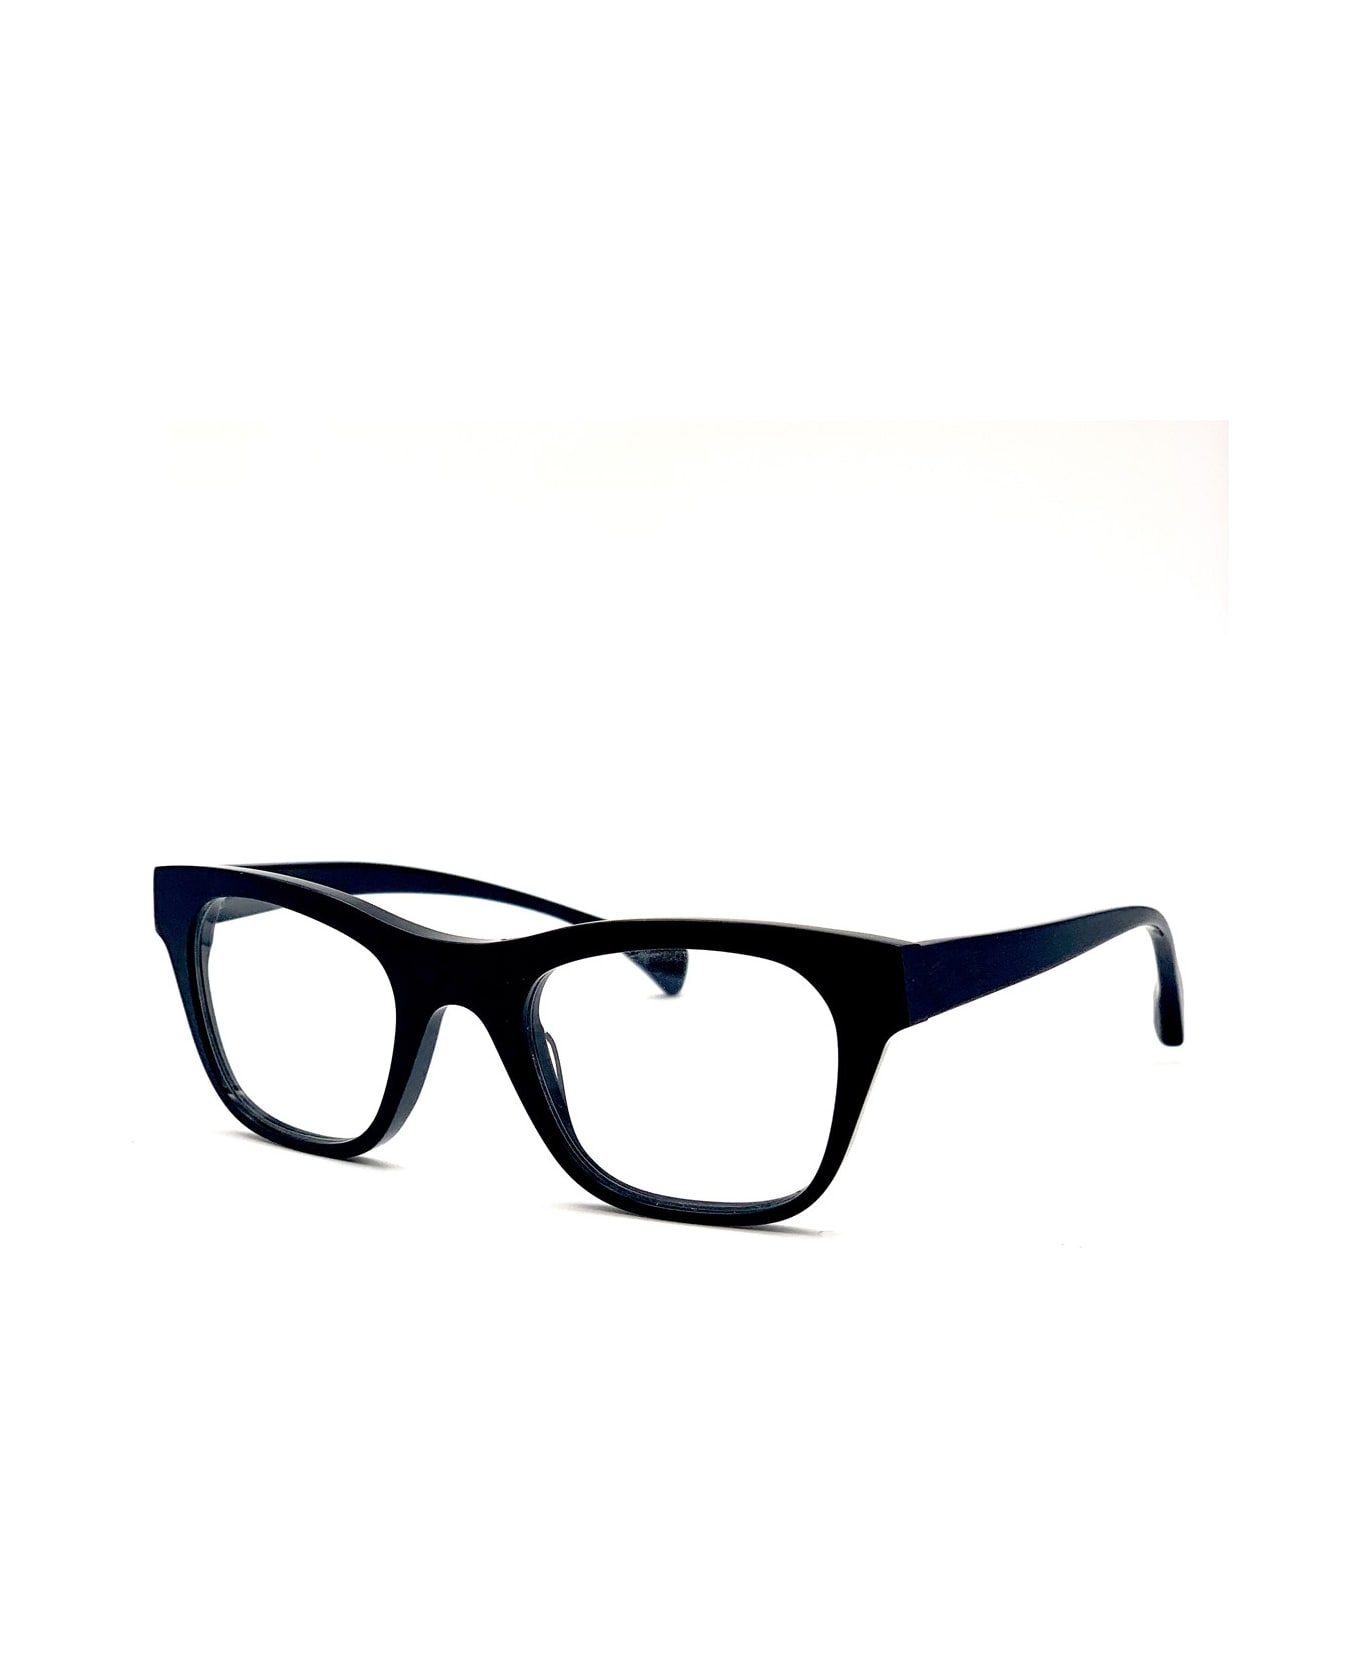 Jacques Durand Madere Xl 101 Glasses - Nero